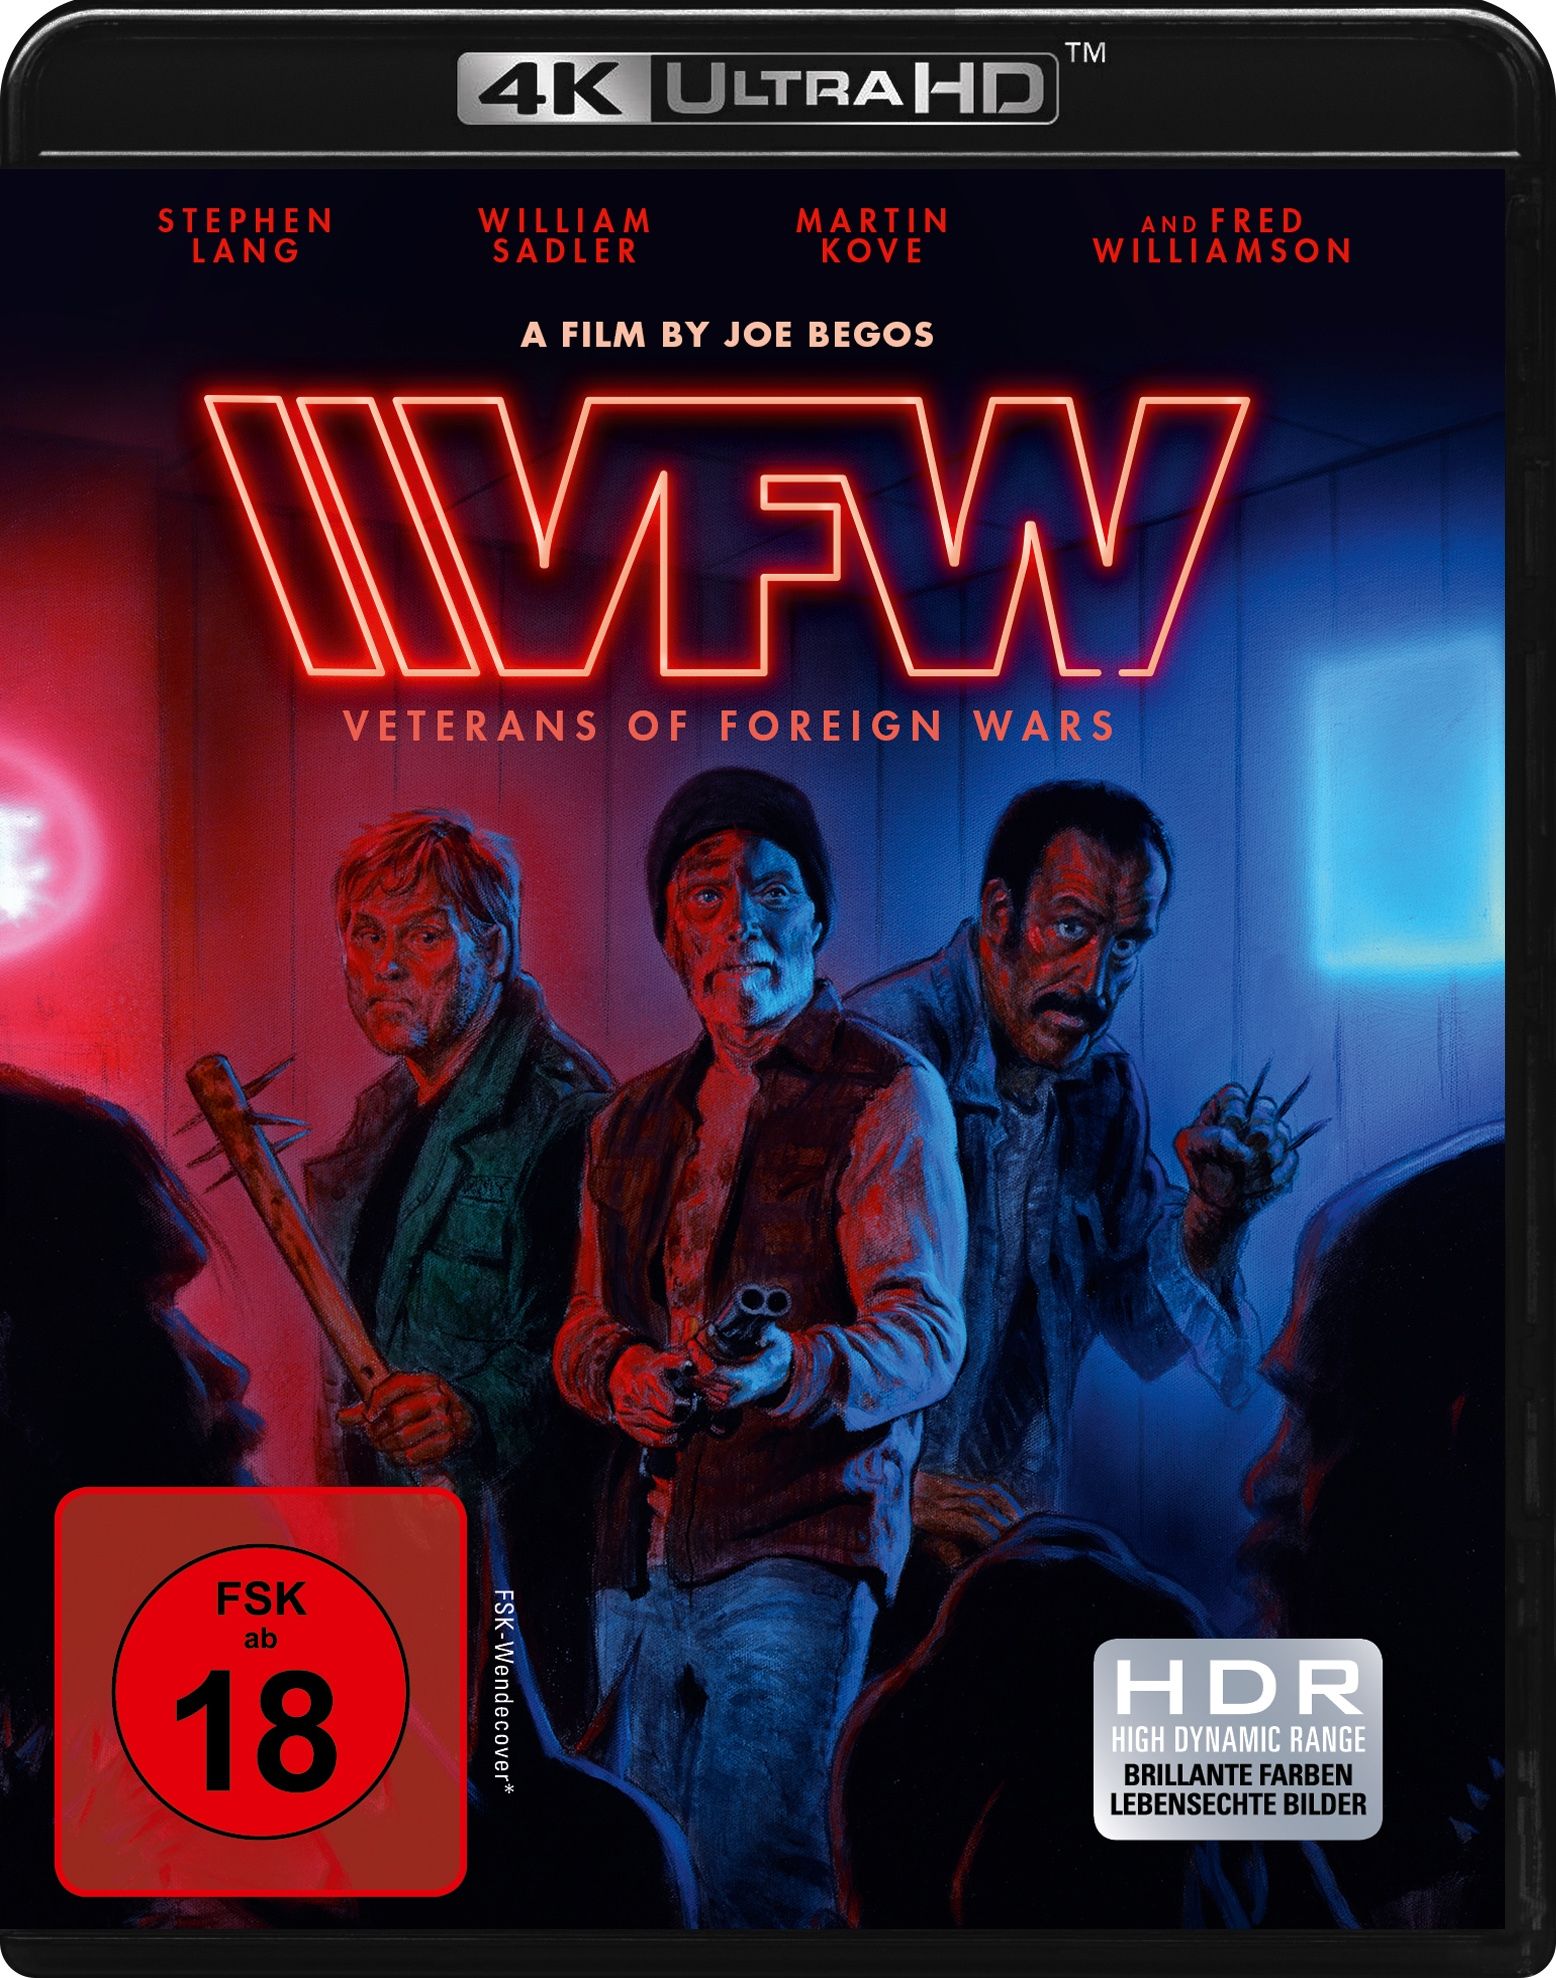 VFW - Veterans of Foreign Wars (UHD BLURAY)